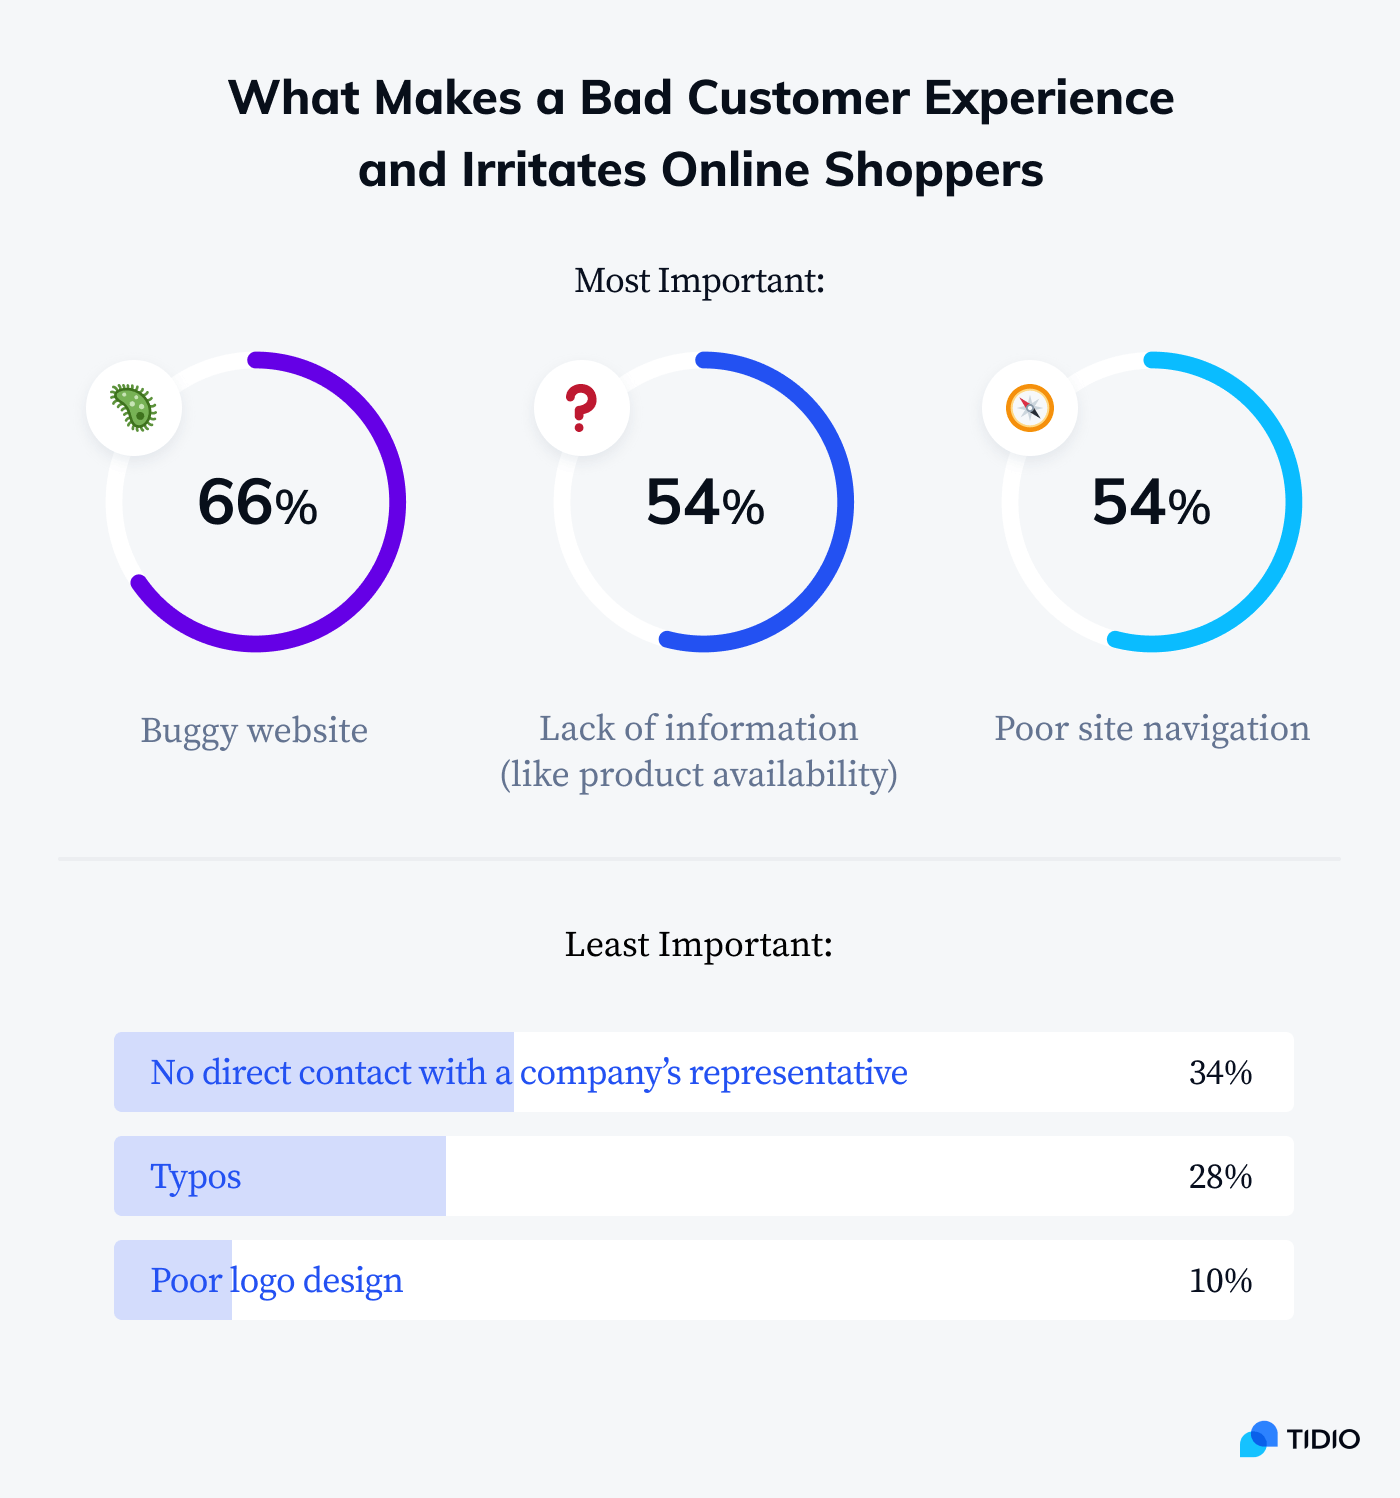 What makes a bad customer experience and irritates online shoppers statistics